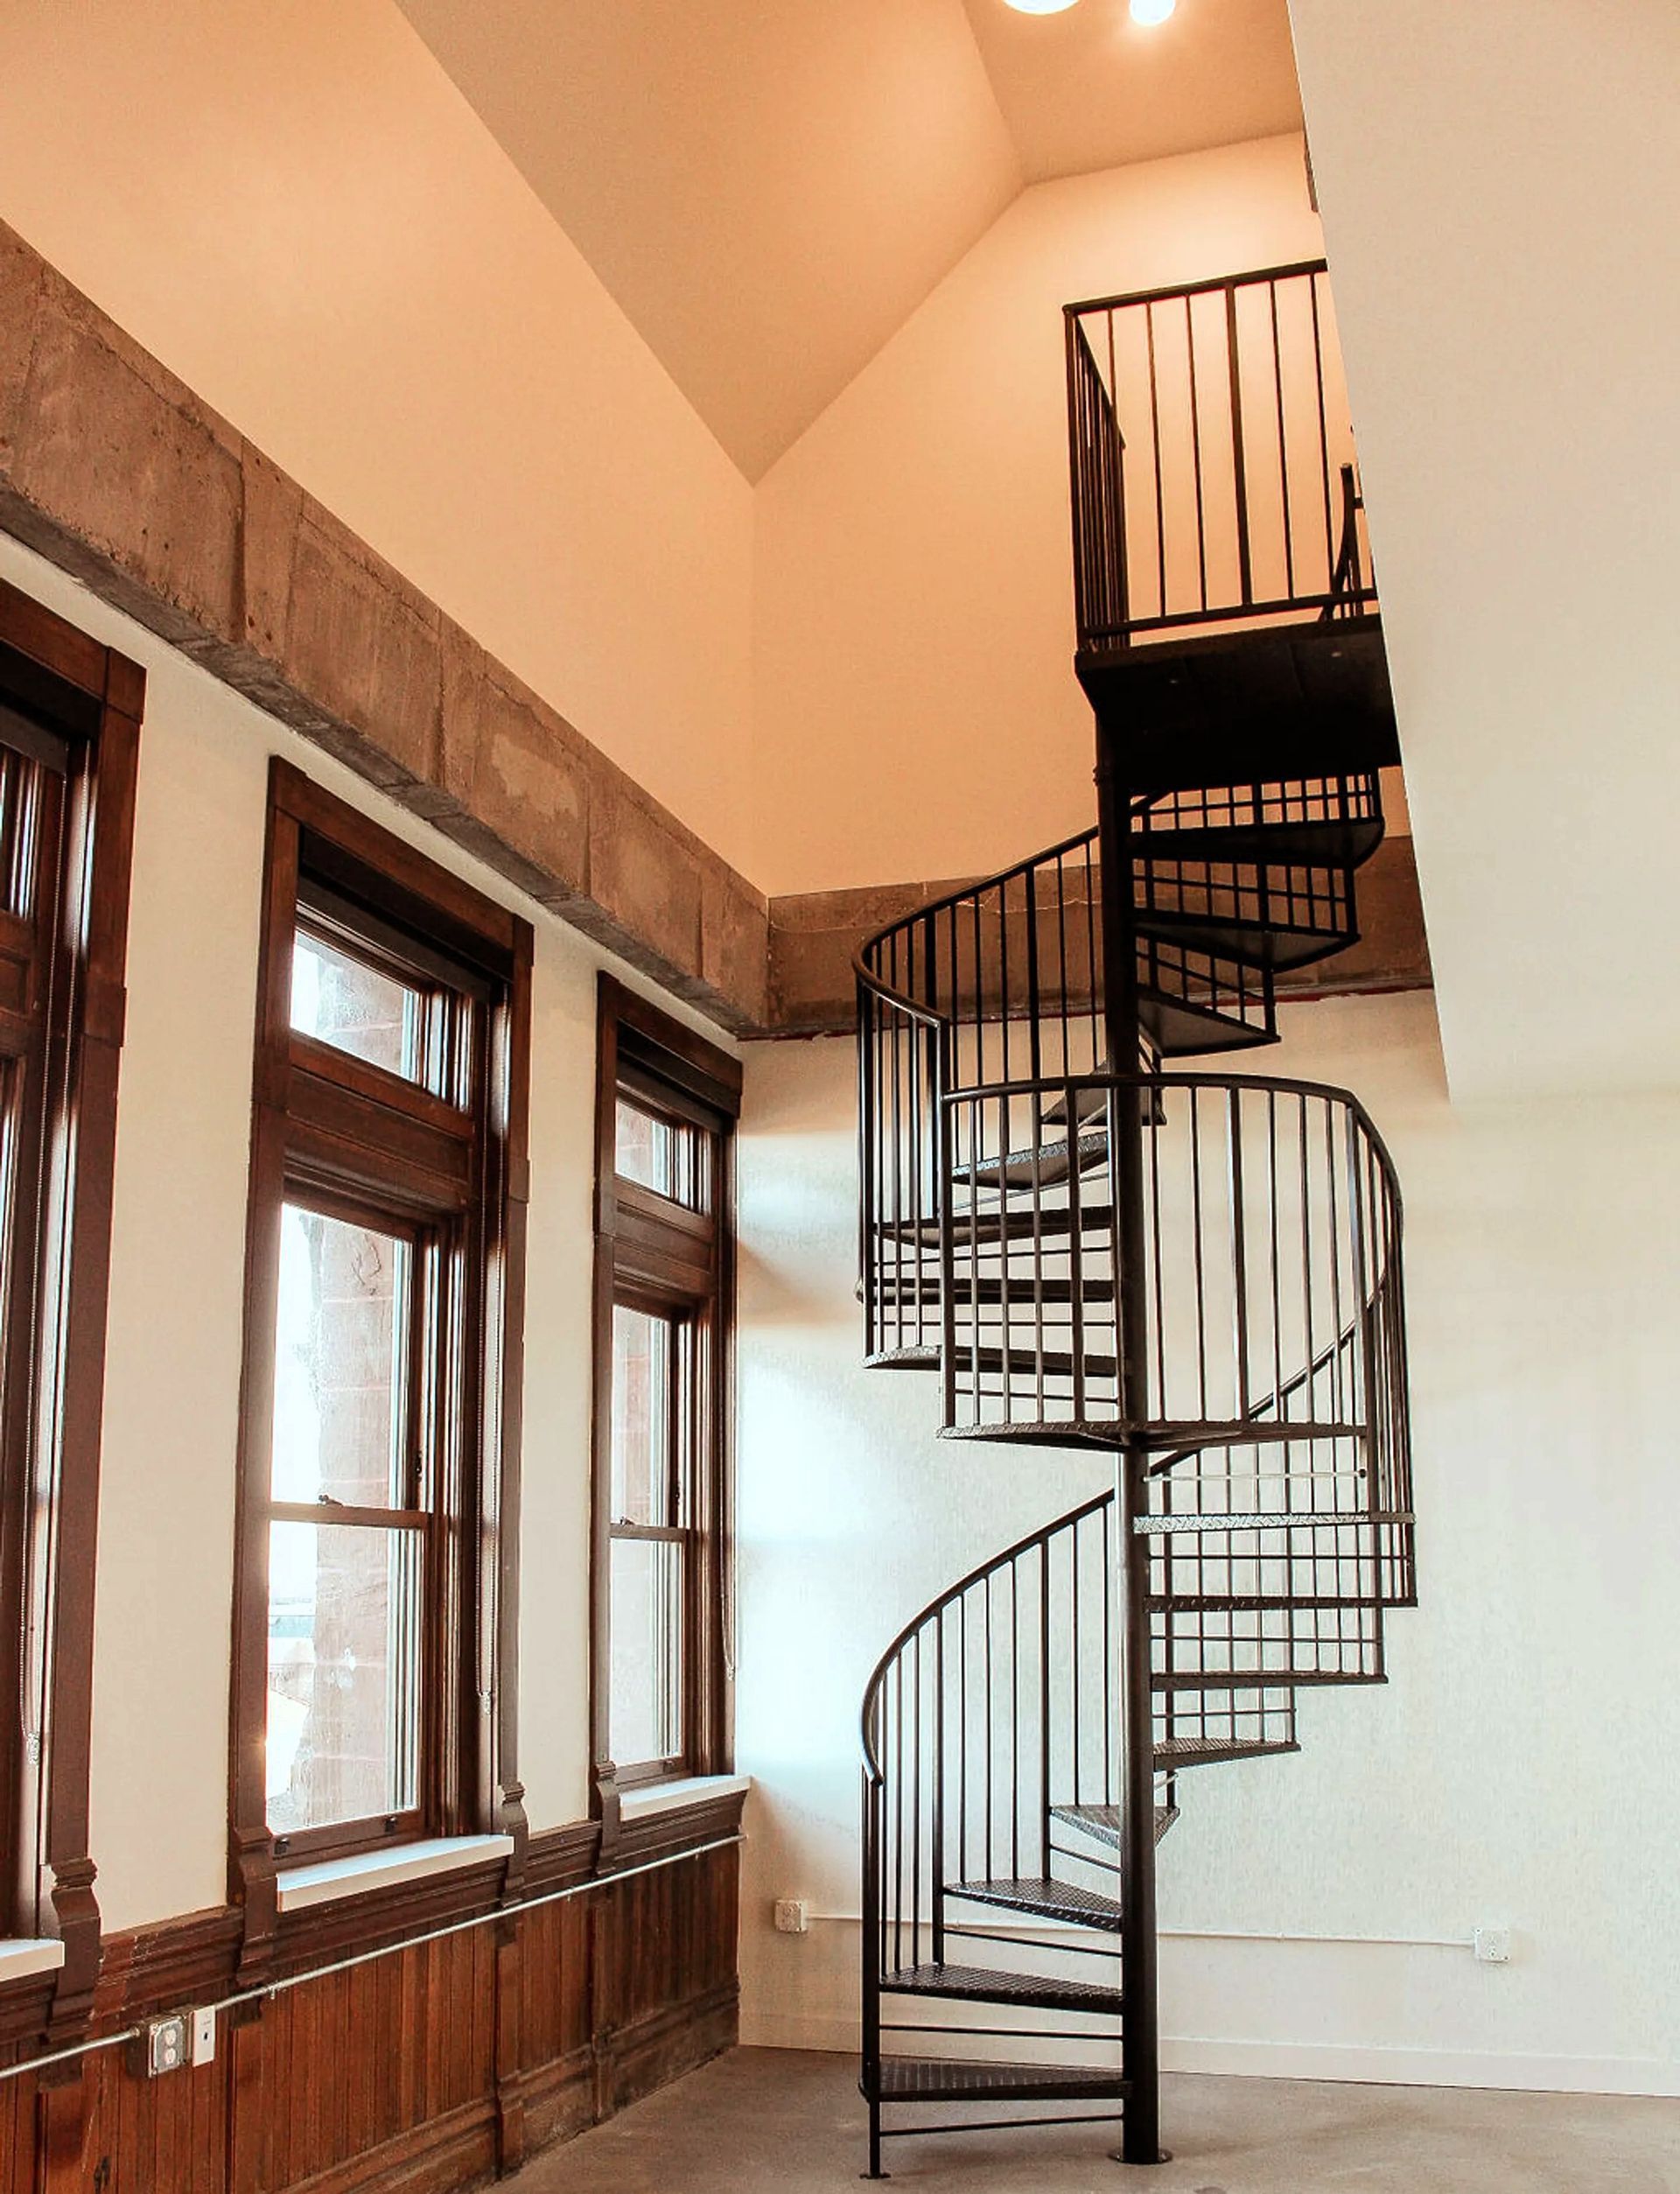 A spiral staircase in a room with lots of windows